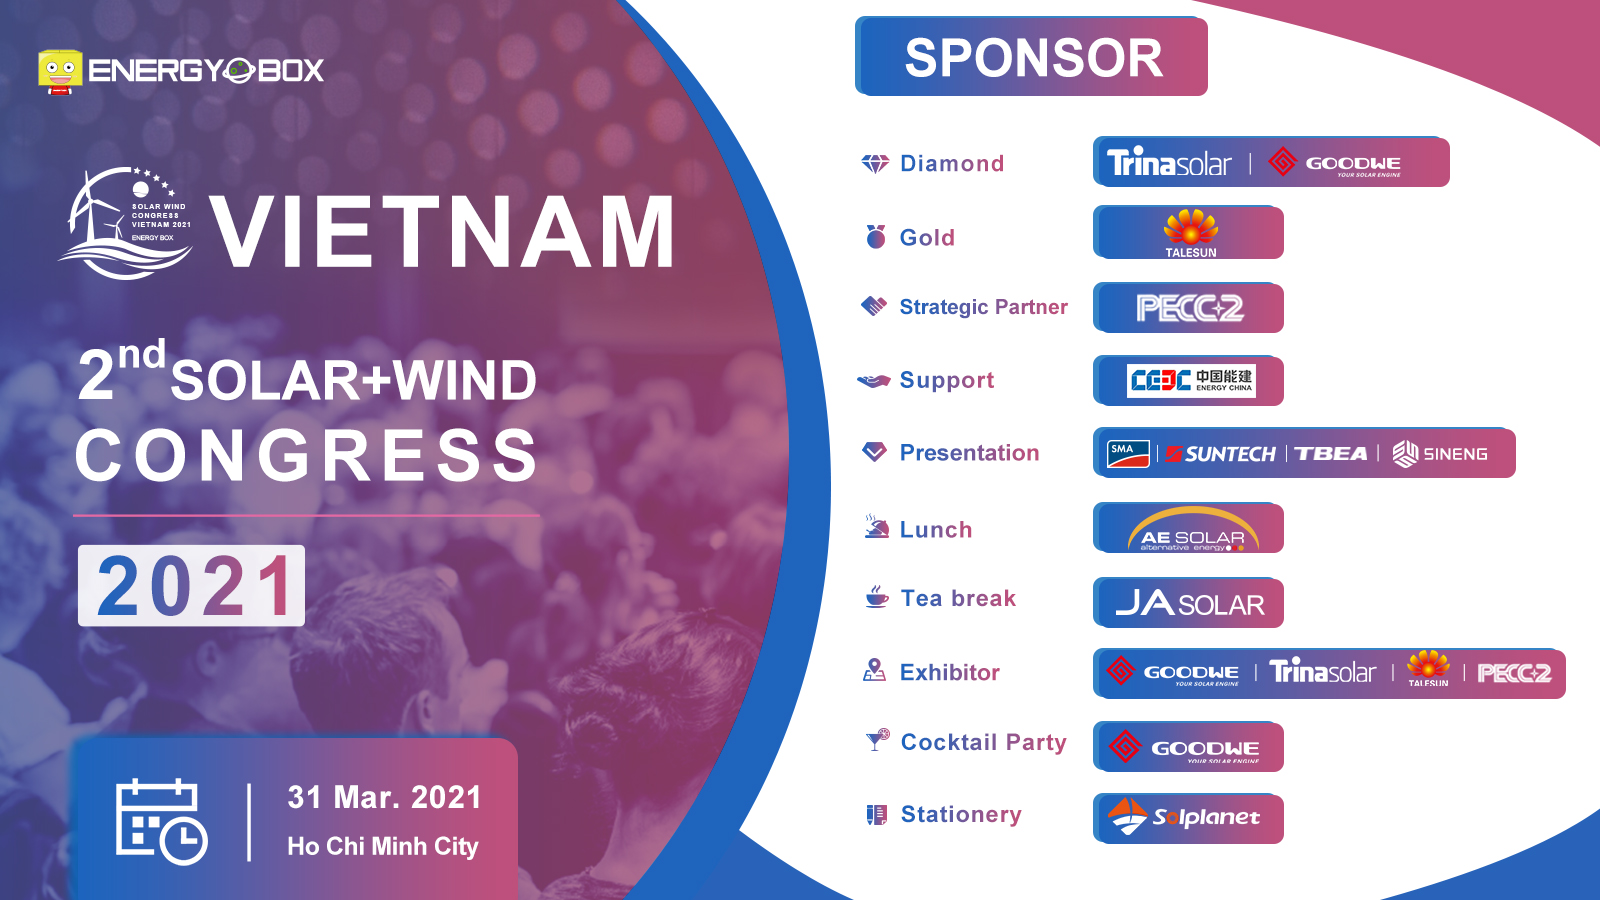 Accelerating investment& deployment of Solar and wind across Vietnam 2021